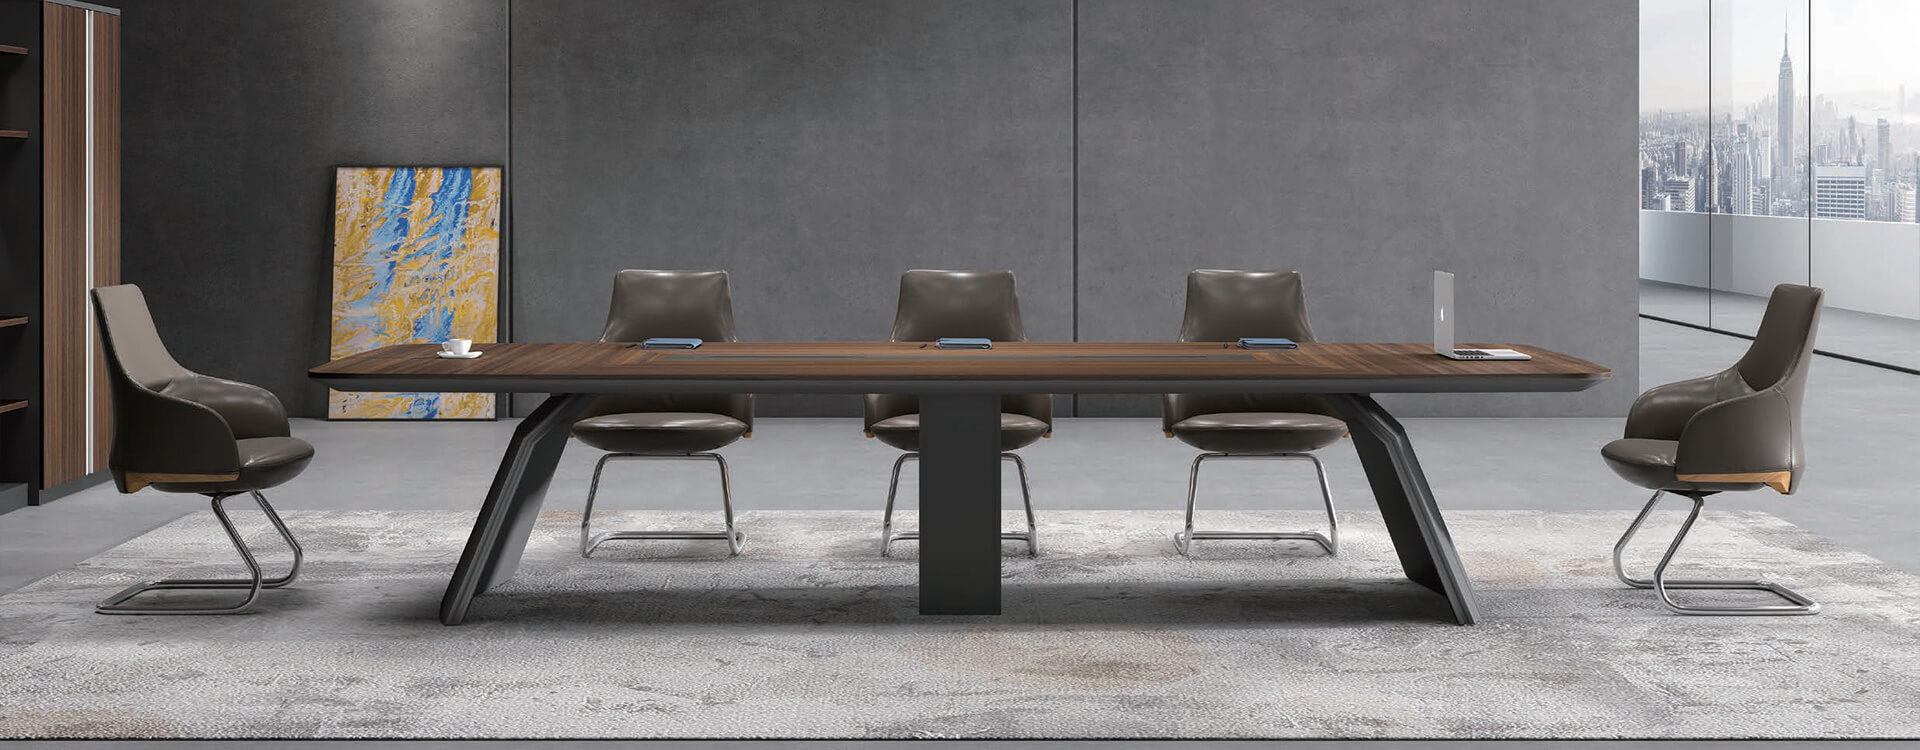 ZHUPIN series conference table